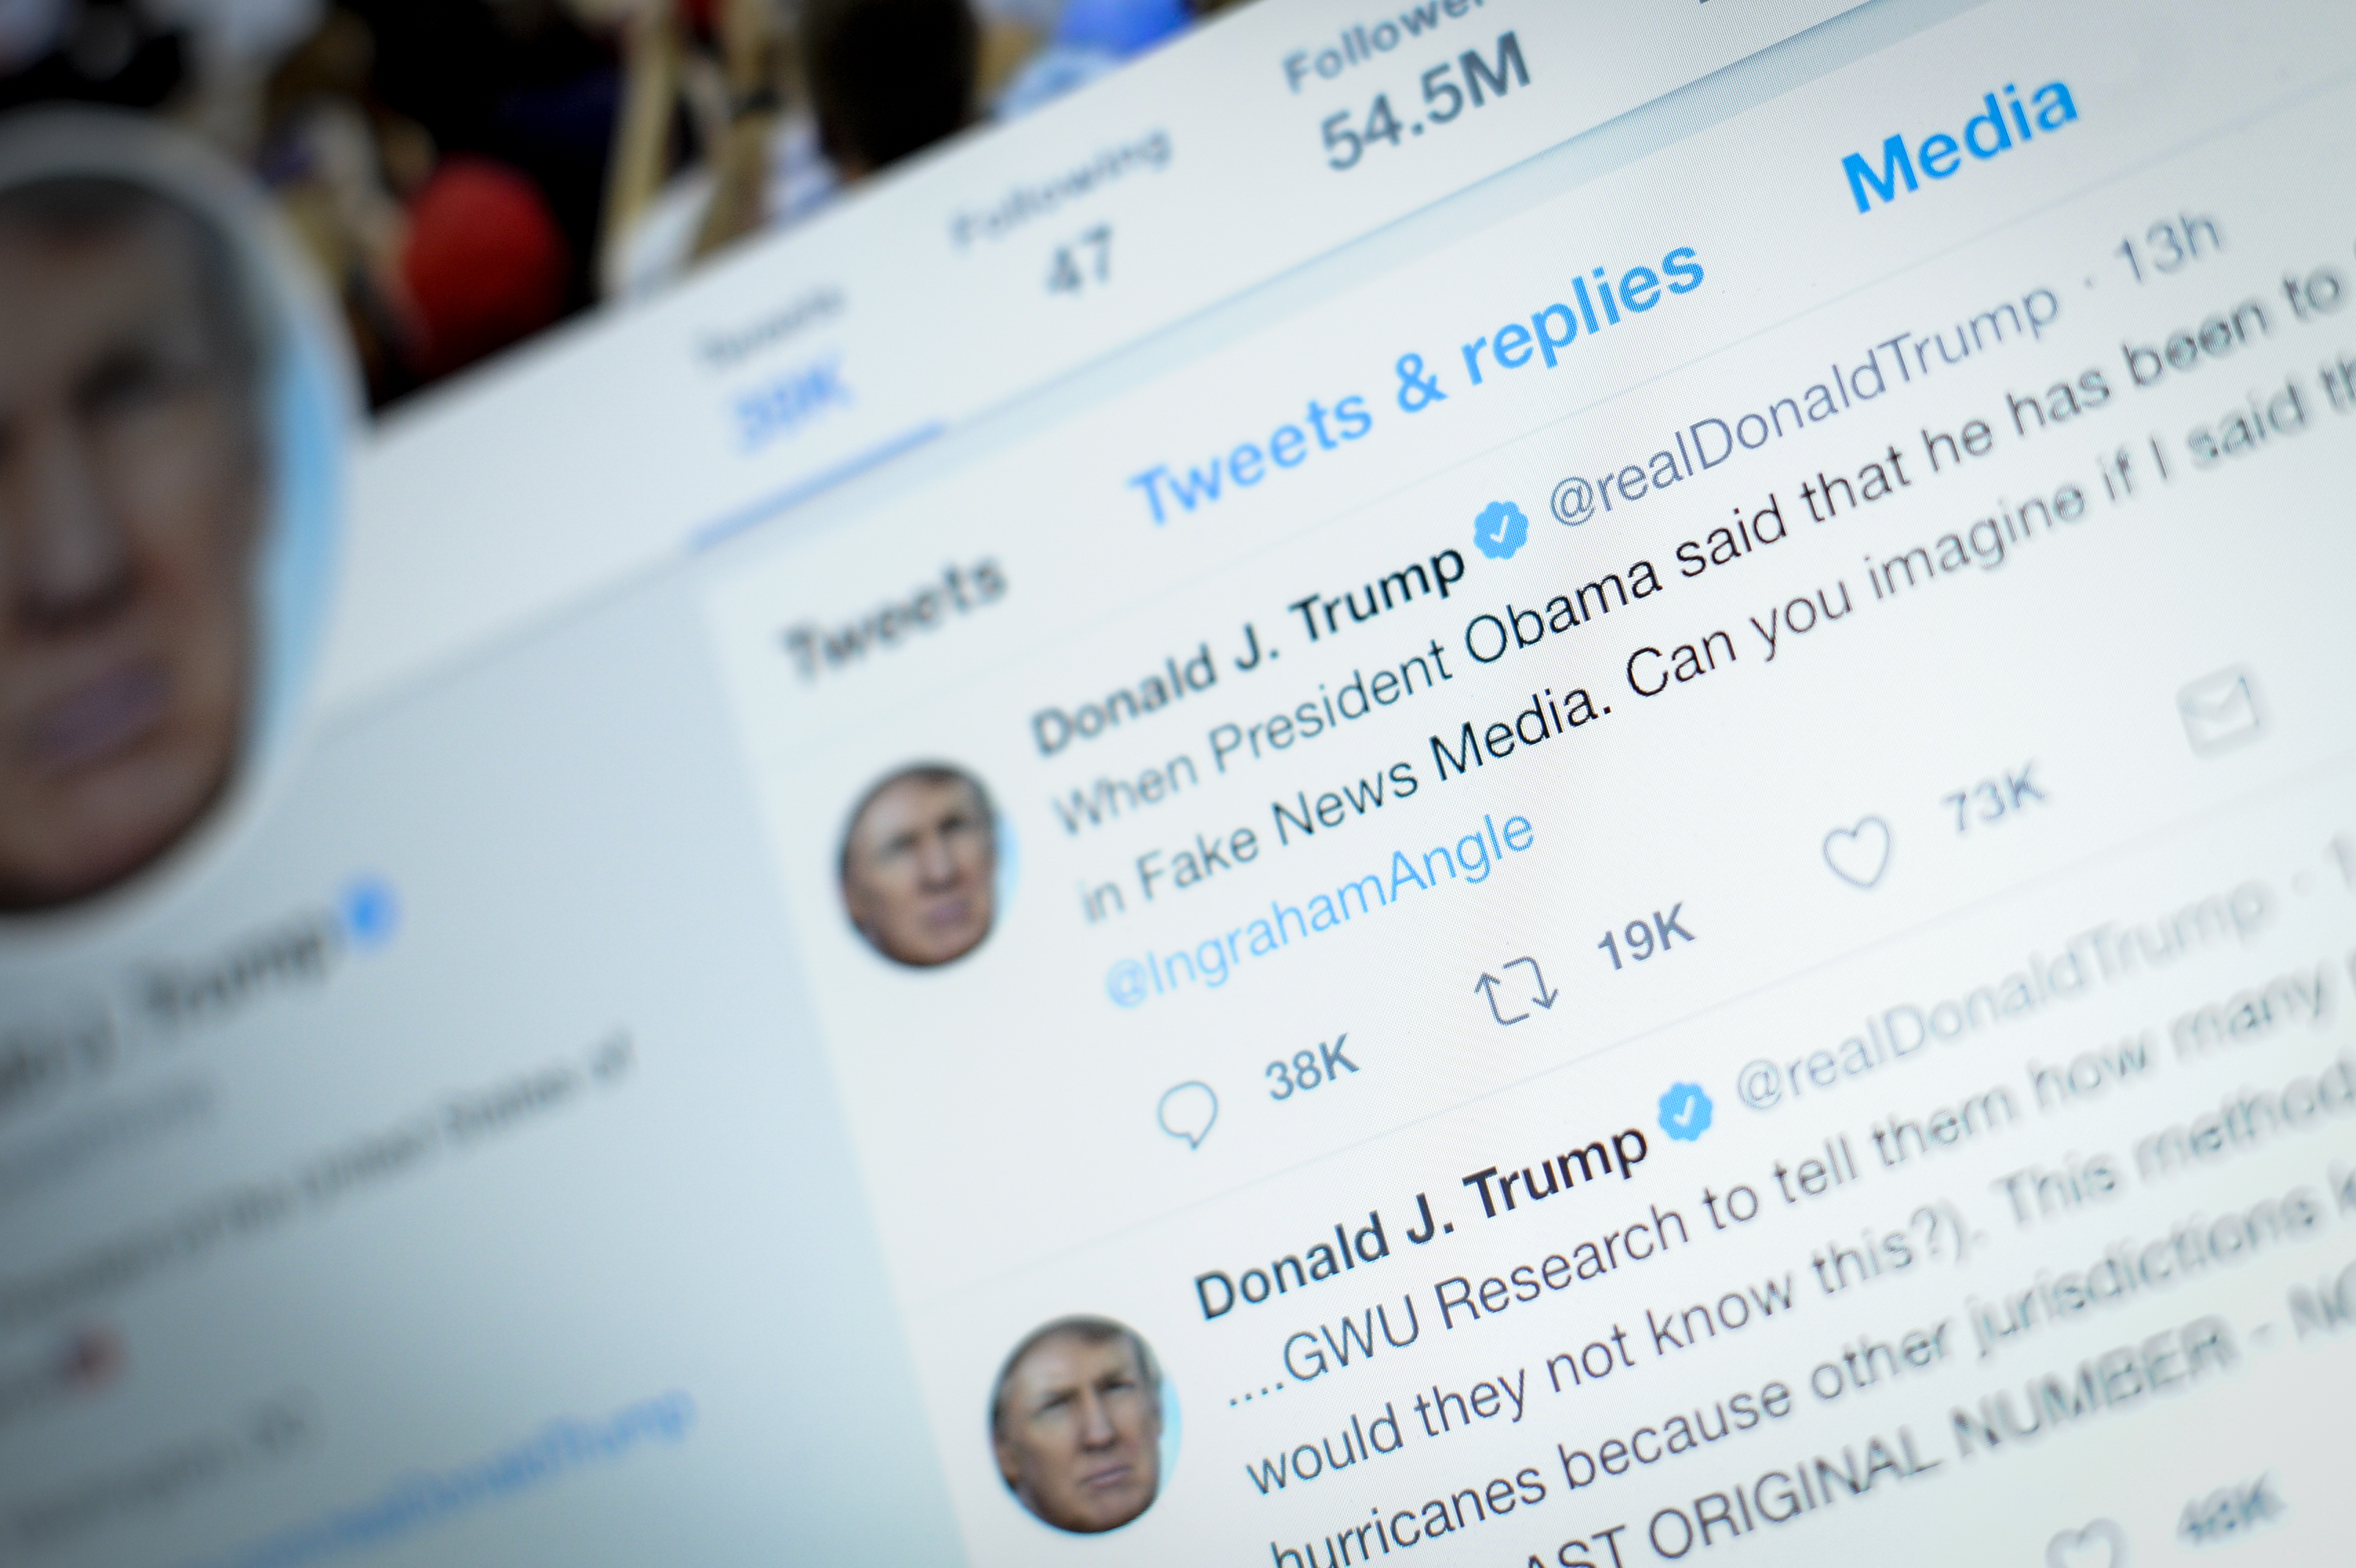 Verified Twitter Users Shared an All-Time-High Amount of Fake News